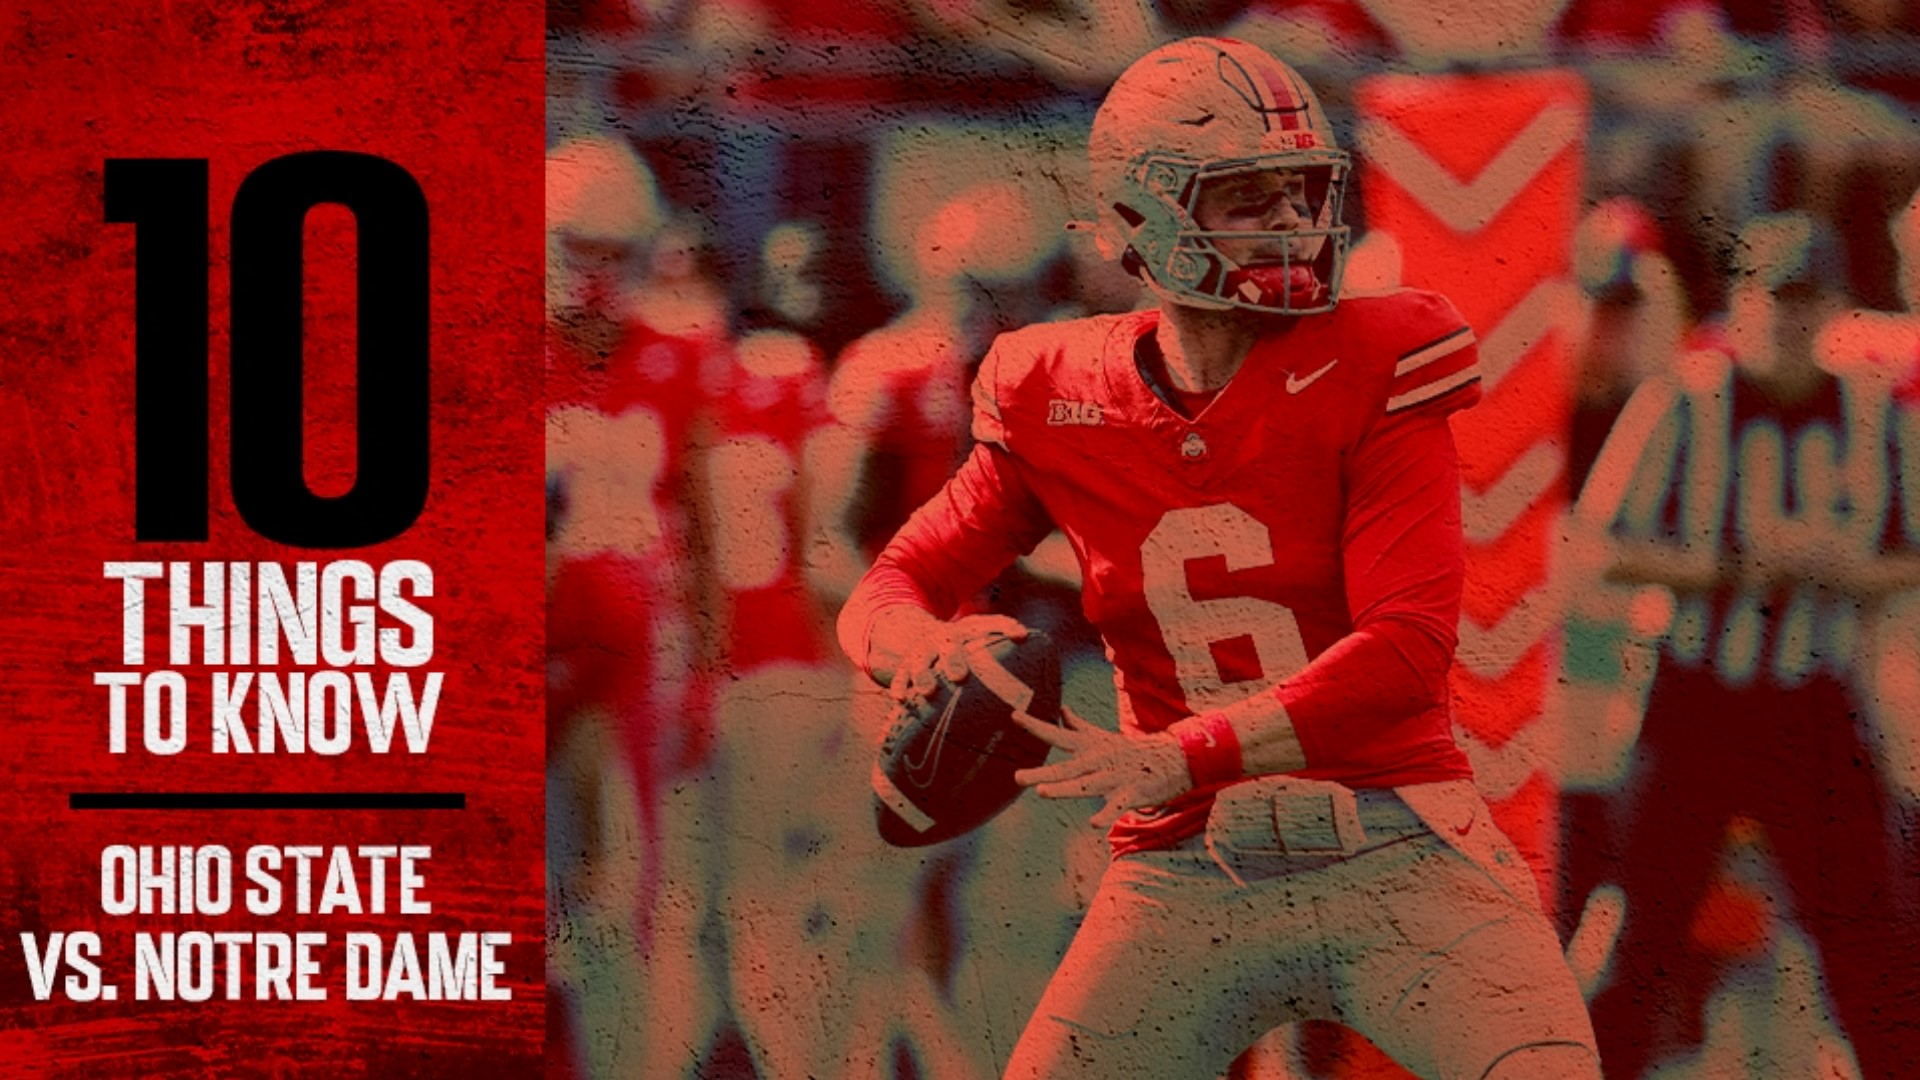 The Ohio State Buckeyes get their first real test on the road against Notre Dame on Saturday.